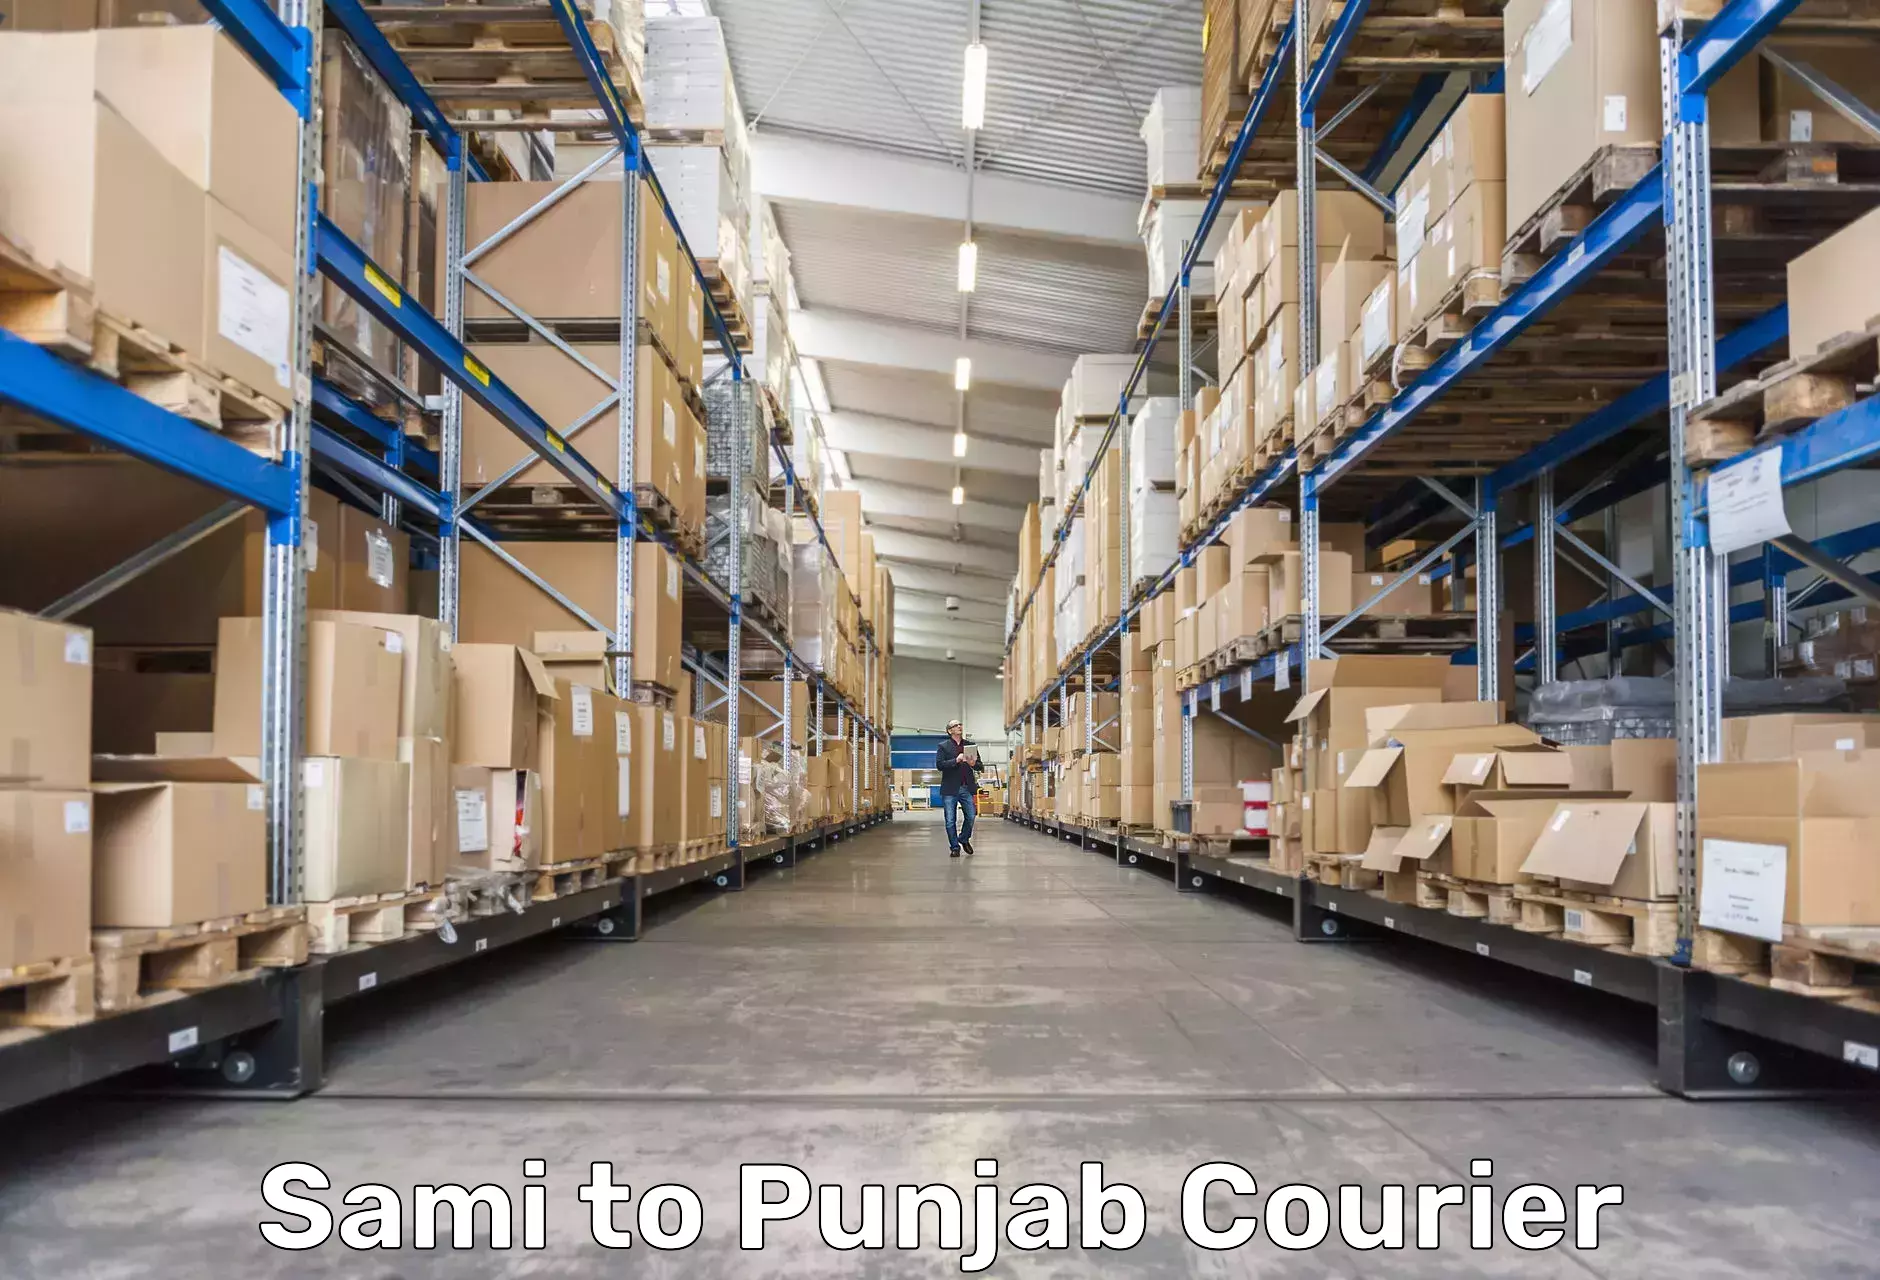 Express delivery capabilities in Sami to Punjab